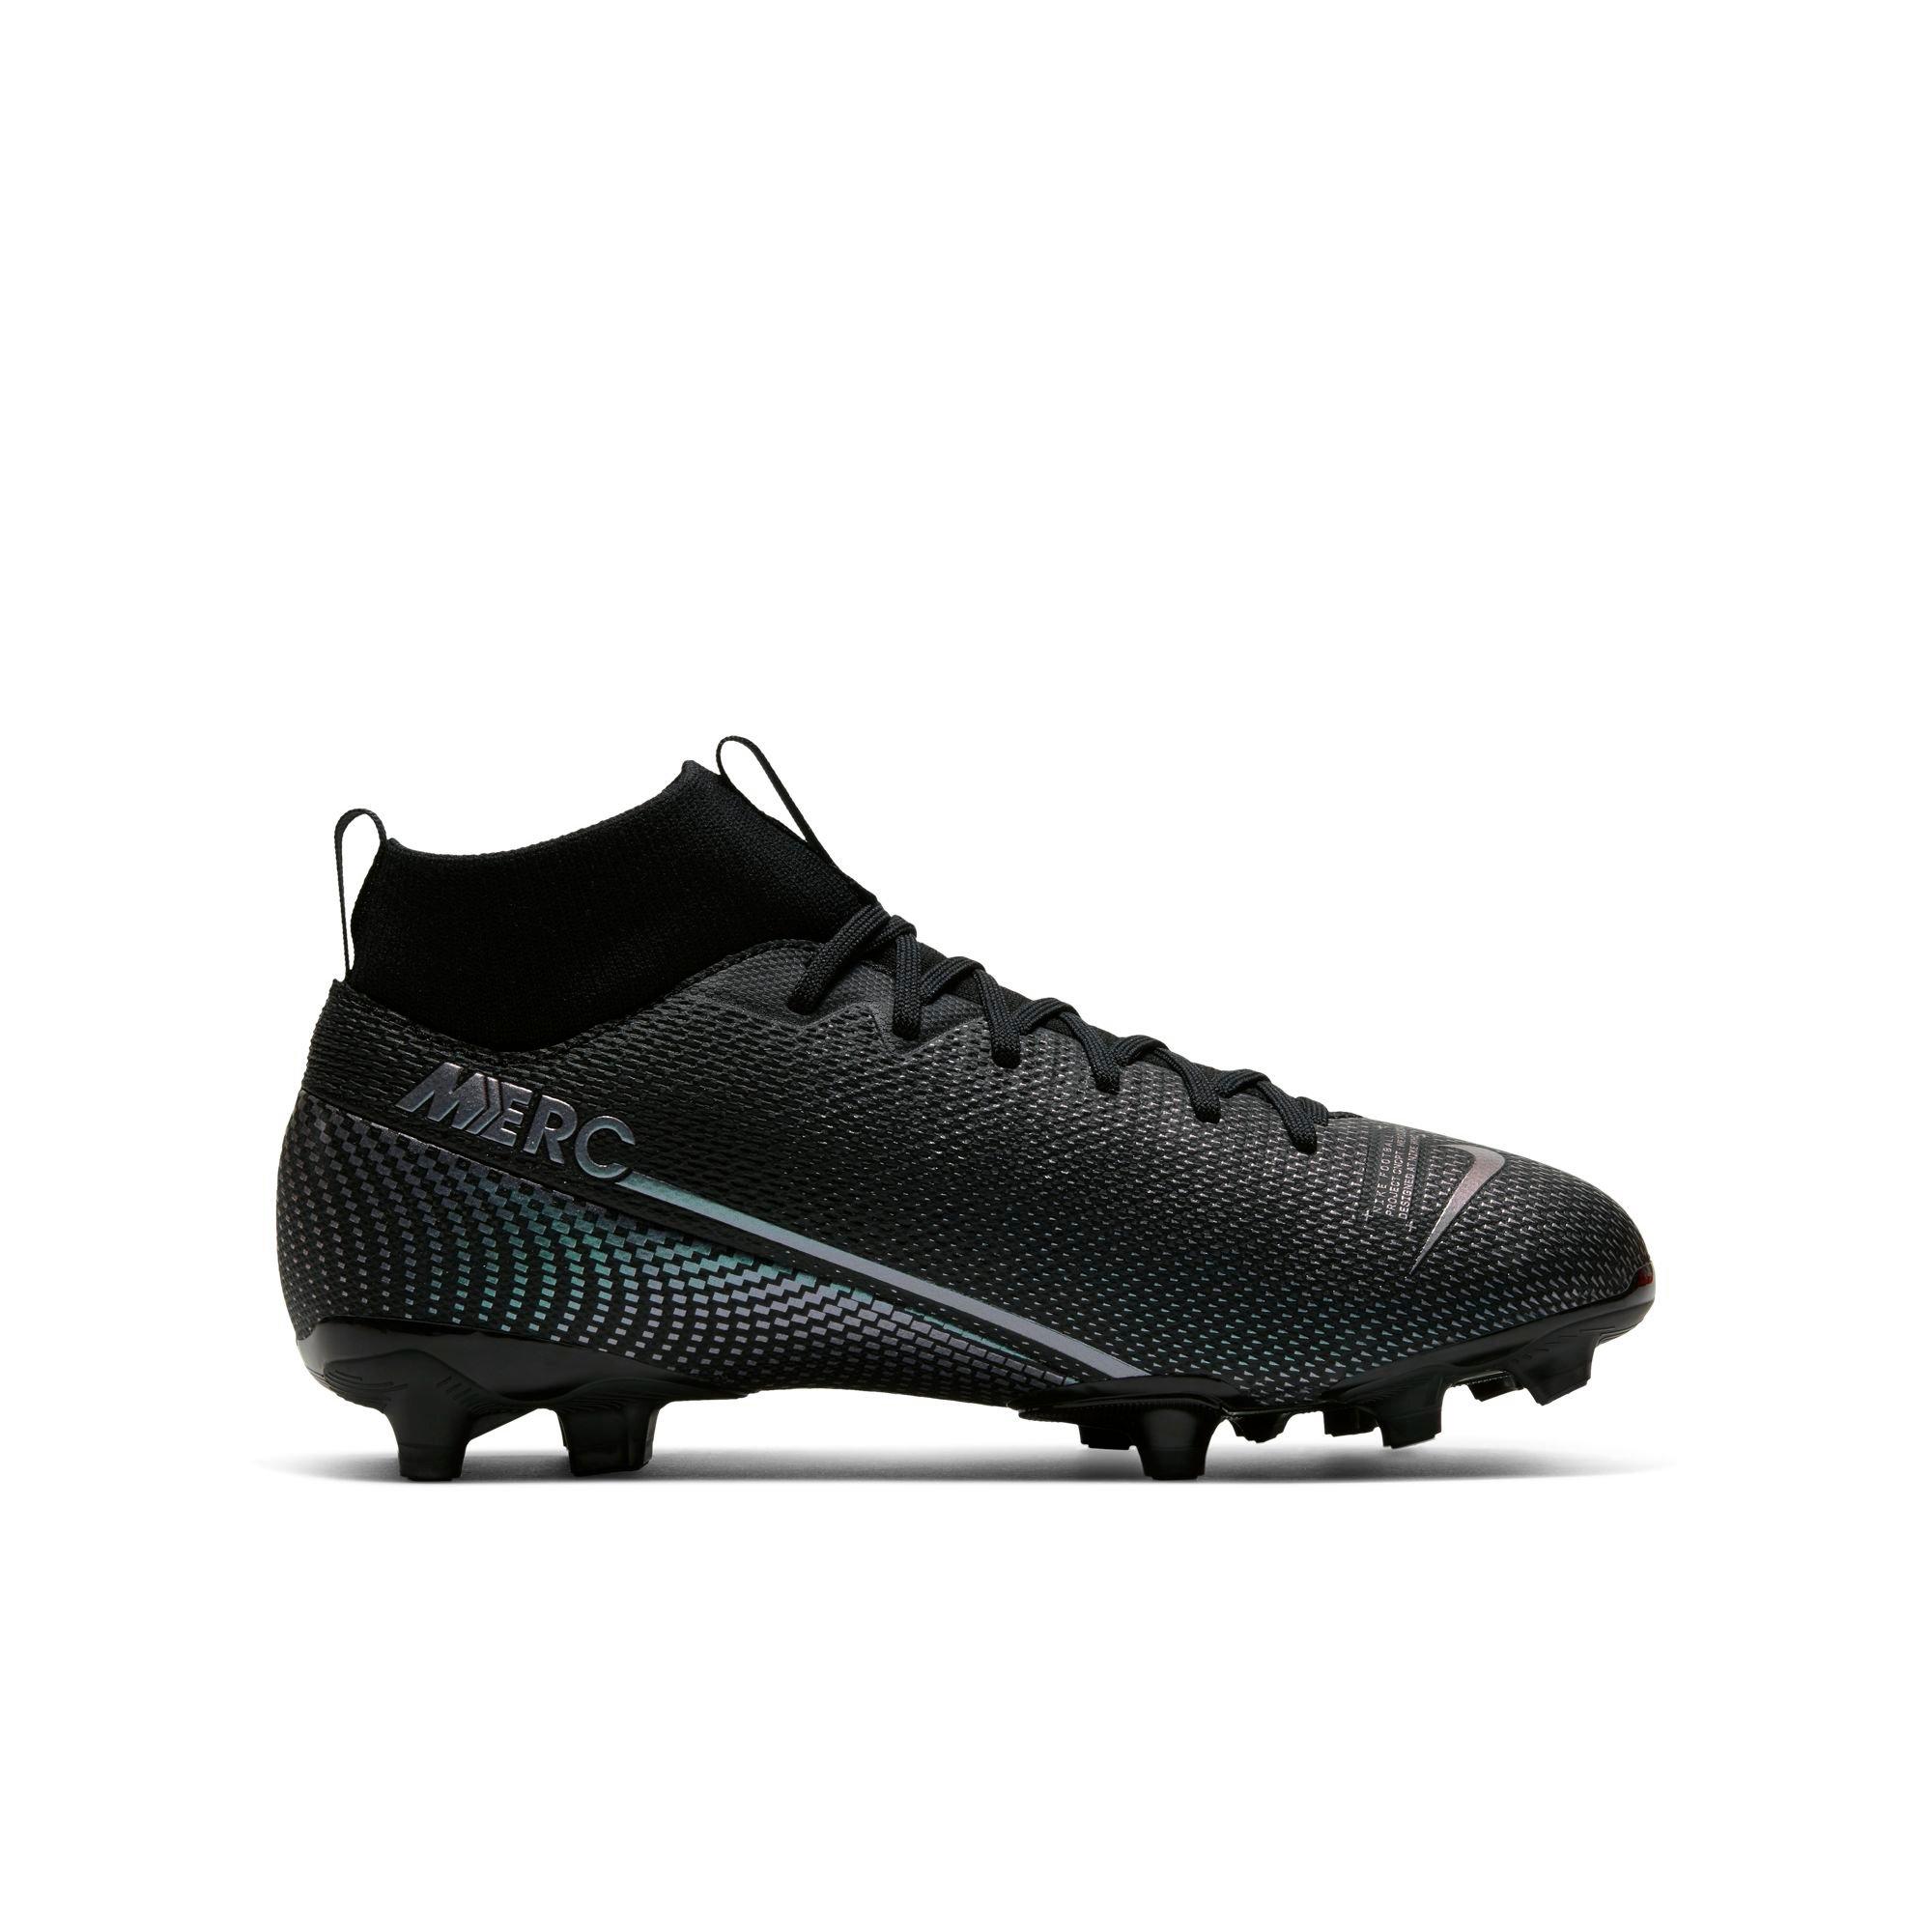 best soccer cleats for girls